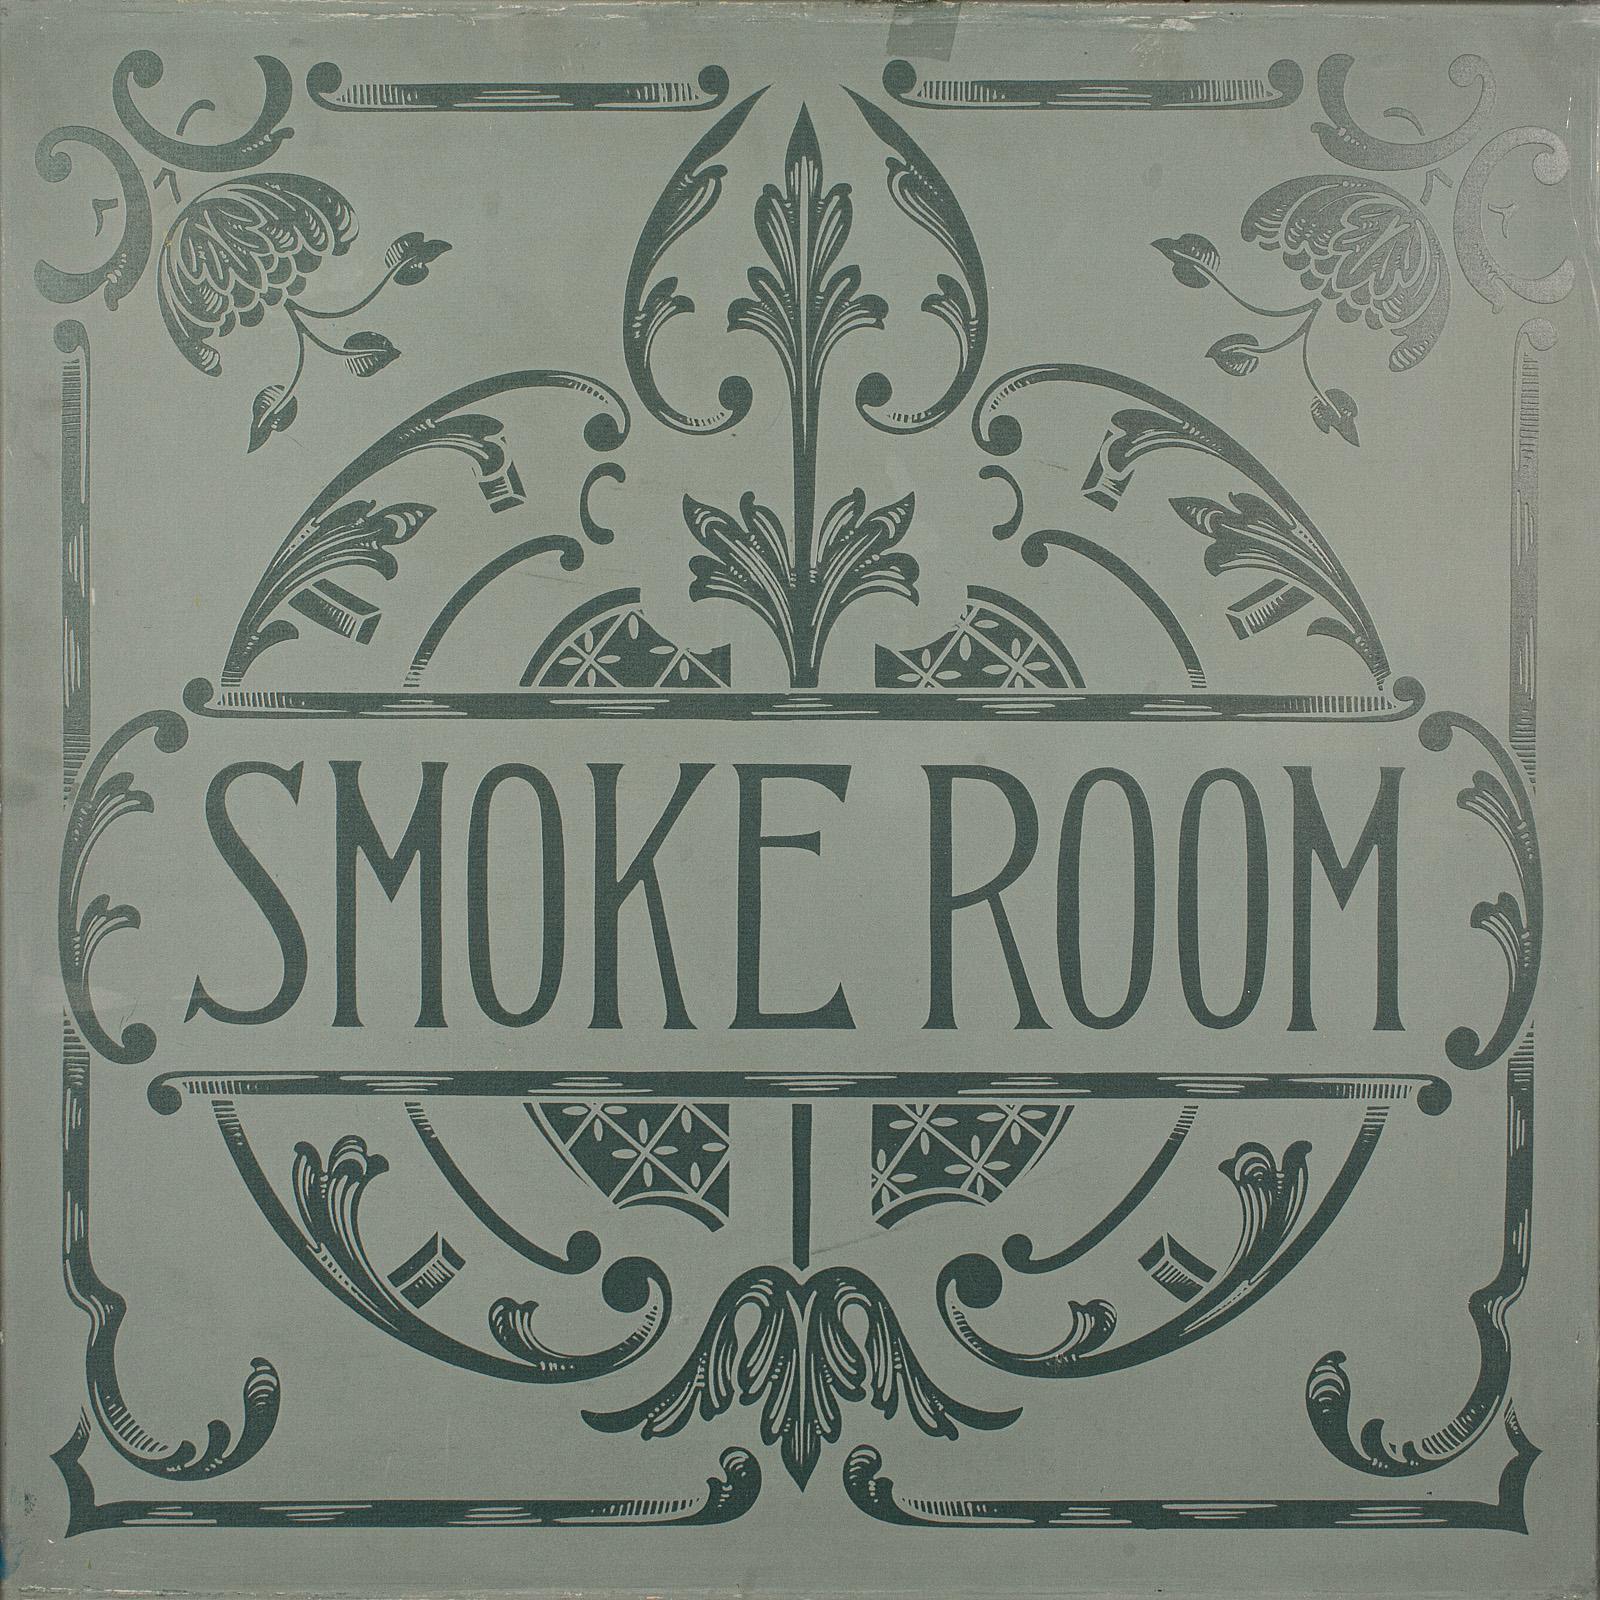 British Antique Ship's Smoke Room Sign, English, Leather Frame, Decorative, Victorian For Sale